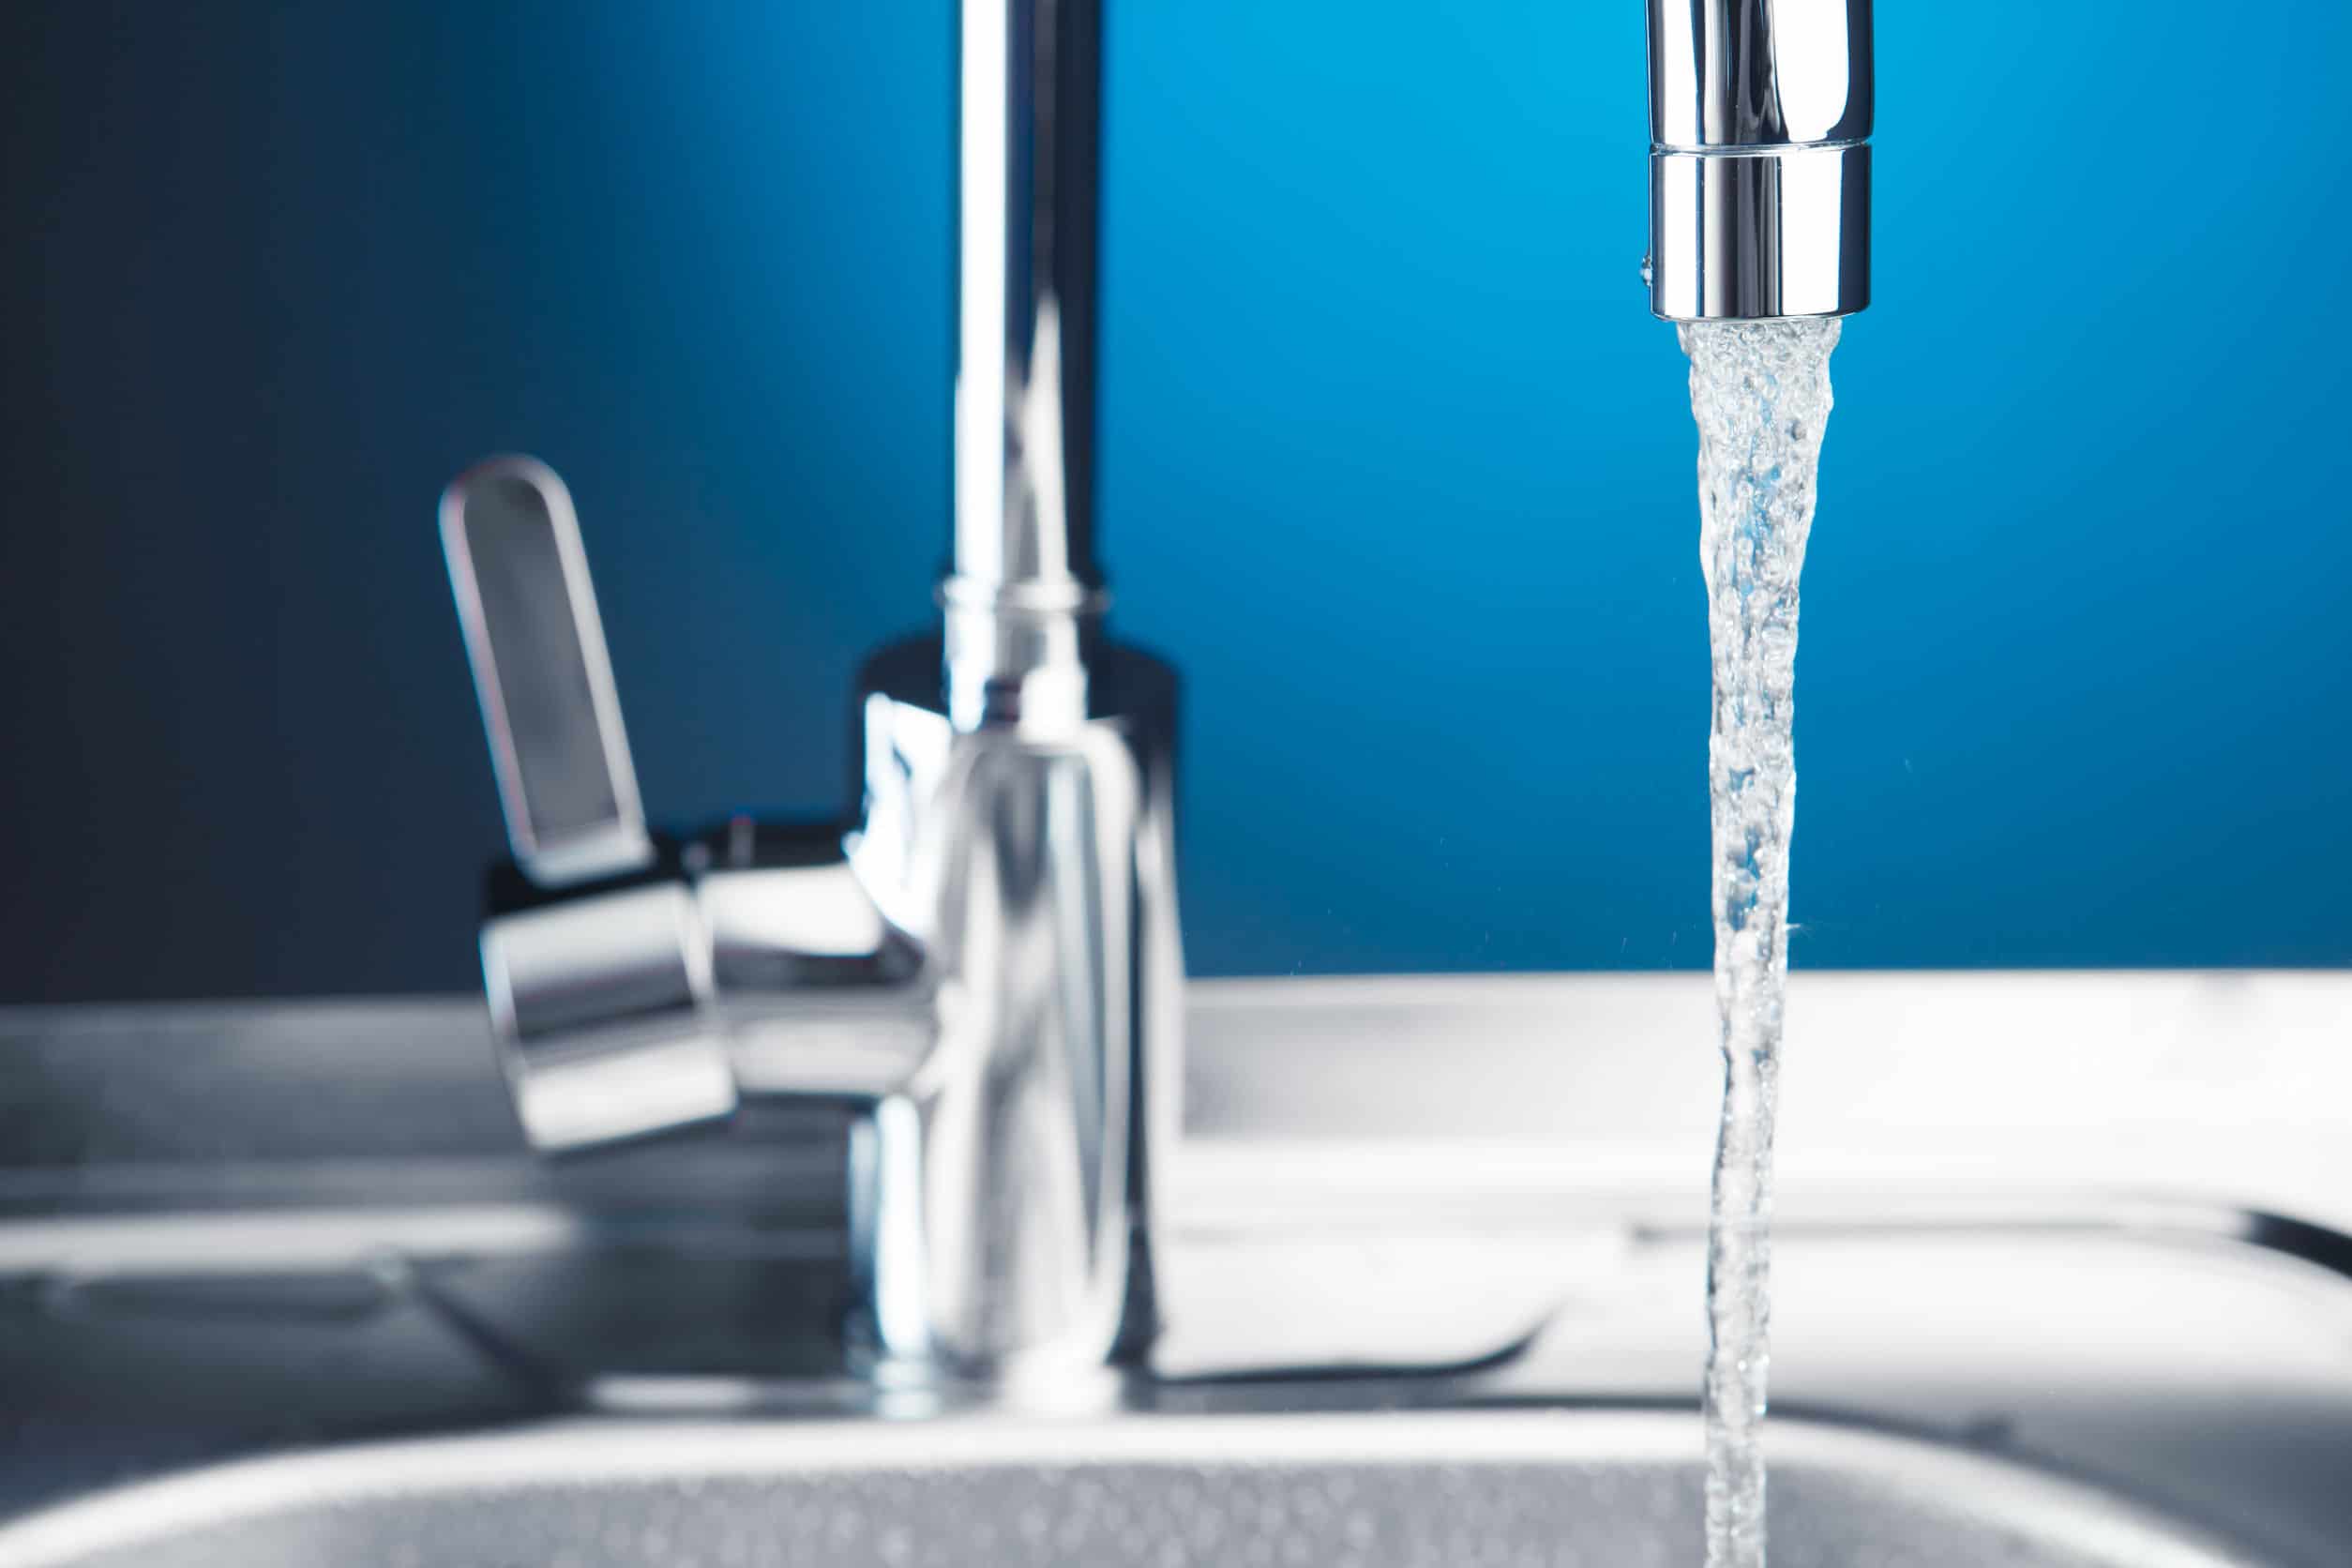 By reducing the buildup of mineral deposits and contaminants, our innovative water systems help prolong the lifespan of your plumbing and appliances, saving you money on repairs and replacements.